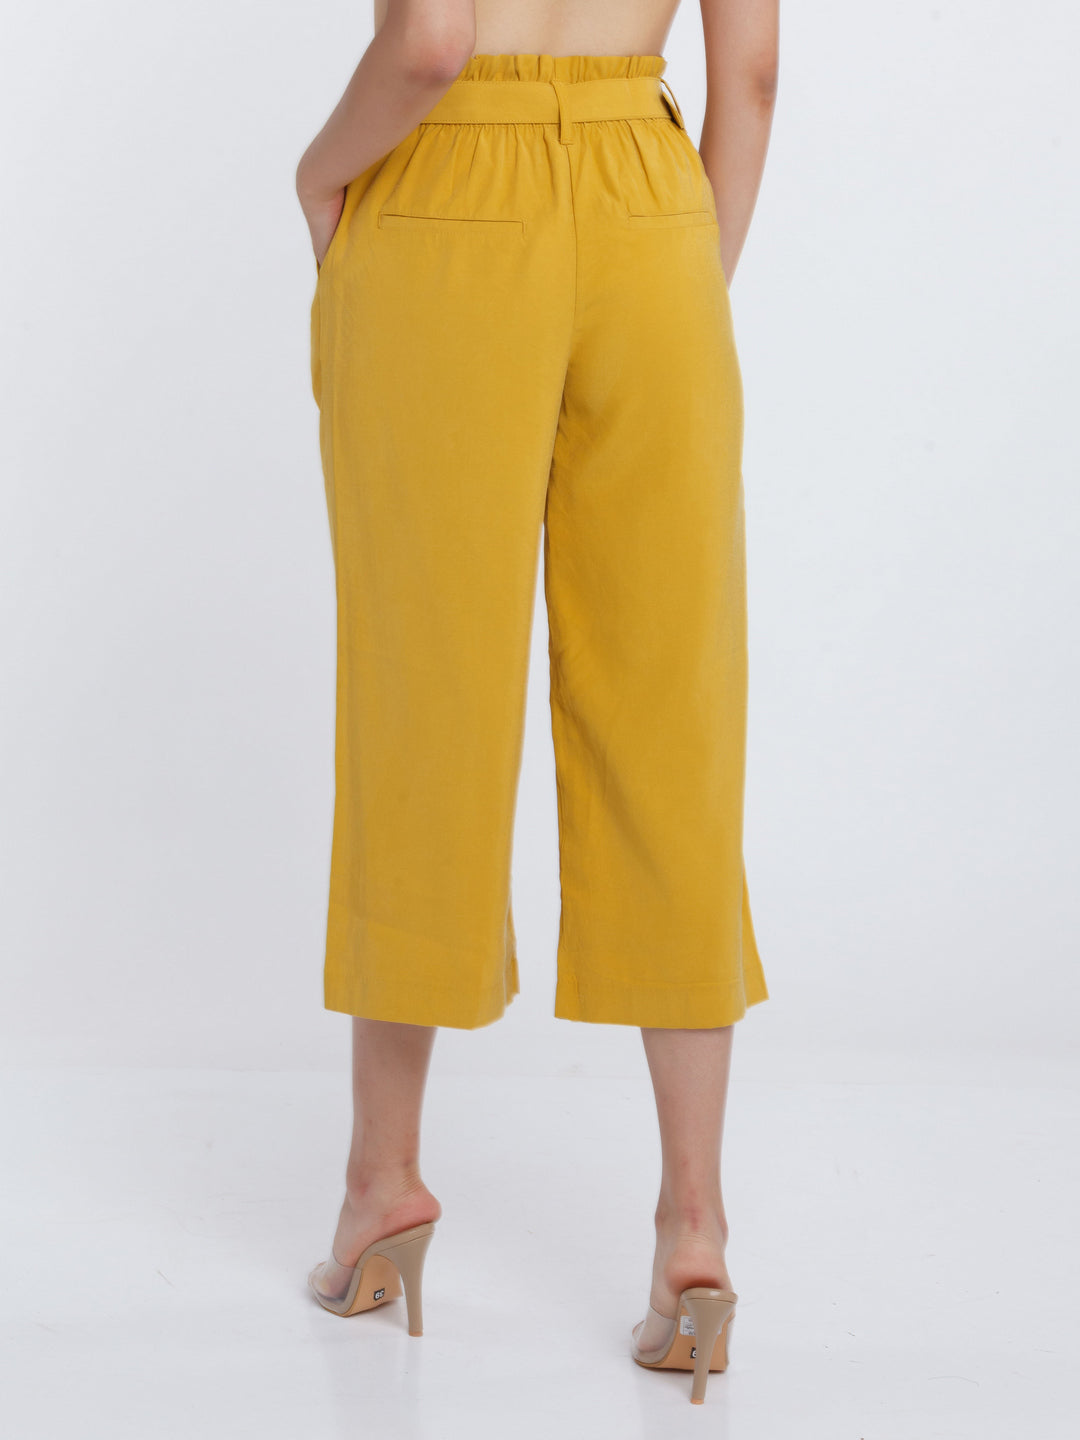 Mustard Solid Culottes For Women